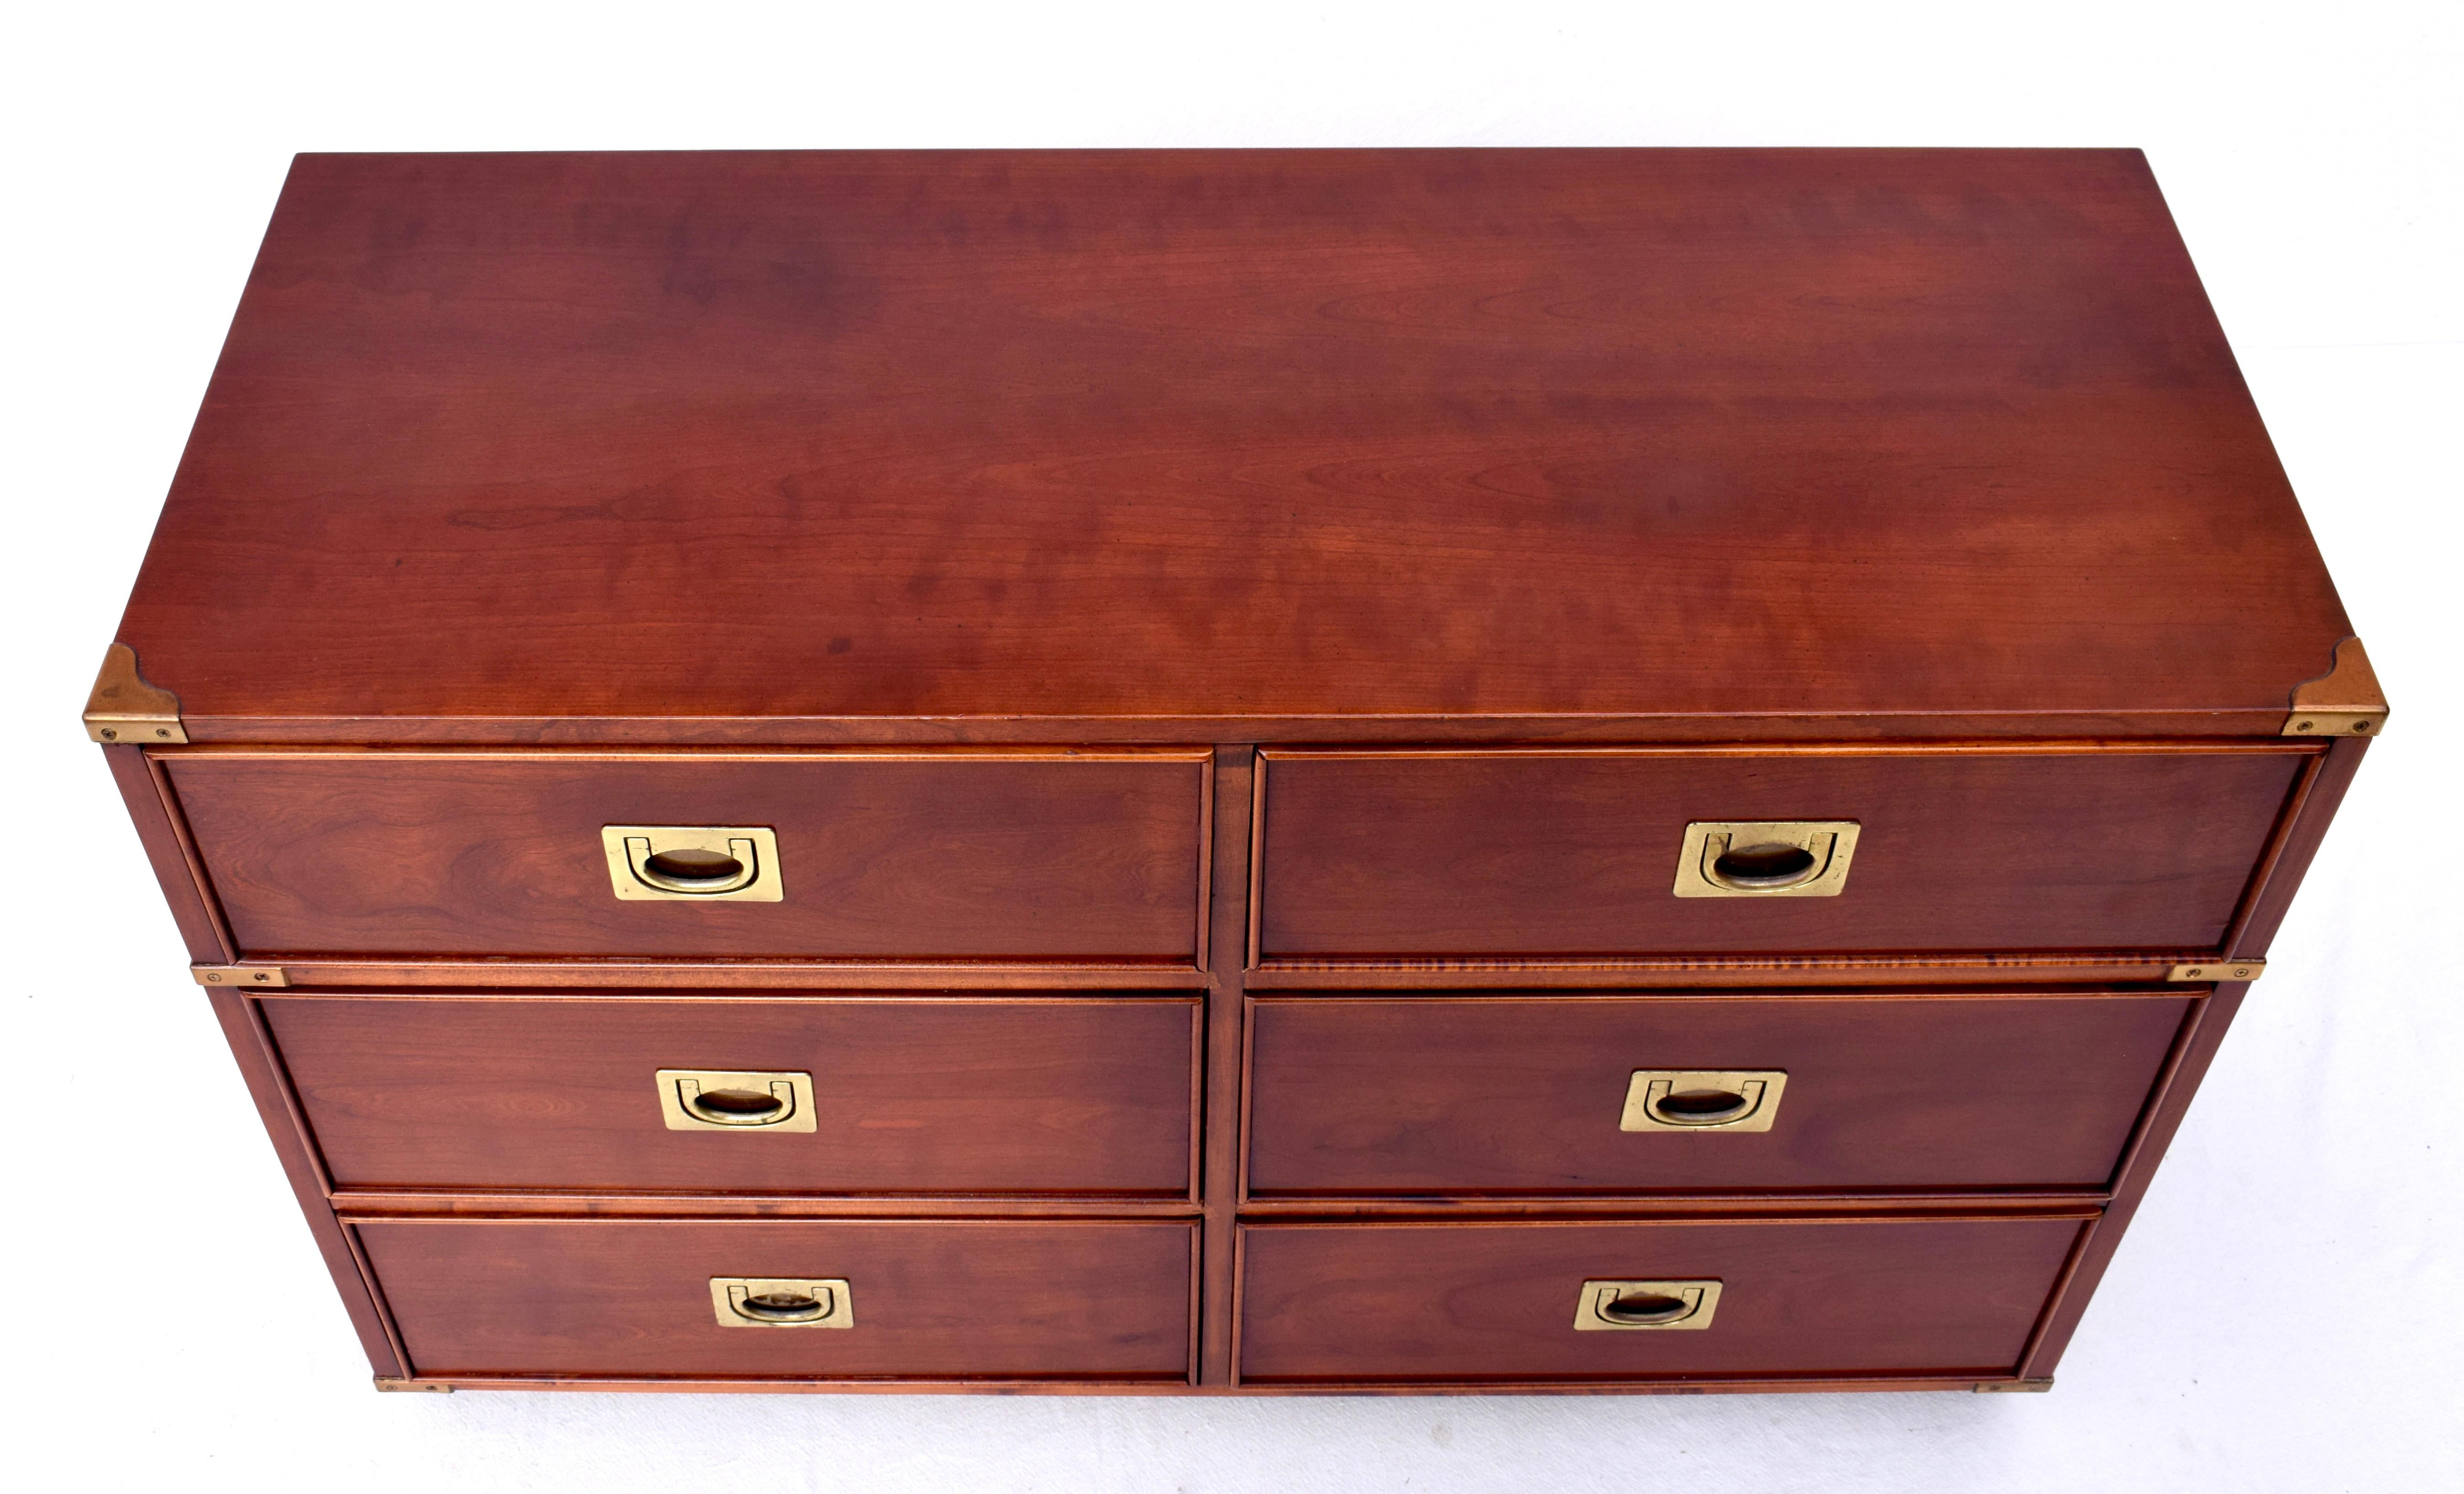 Campaign style dresser with cock beading to six dovetailed drawers boasting fiery Mahogany grains. A well designed mid size chest of drawers with generous storage. Matching pieces can be seen in our separate listings of: 